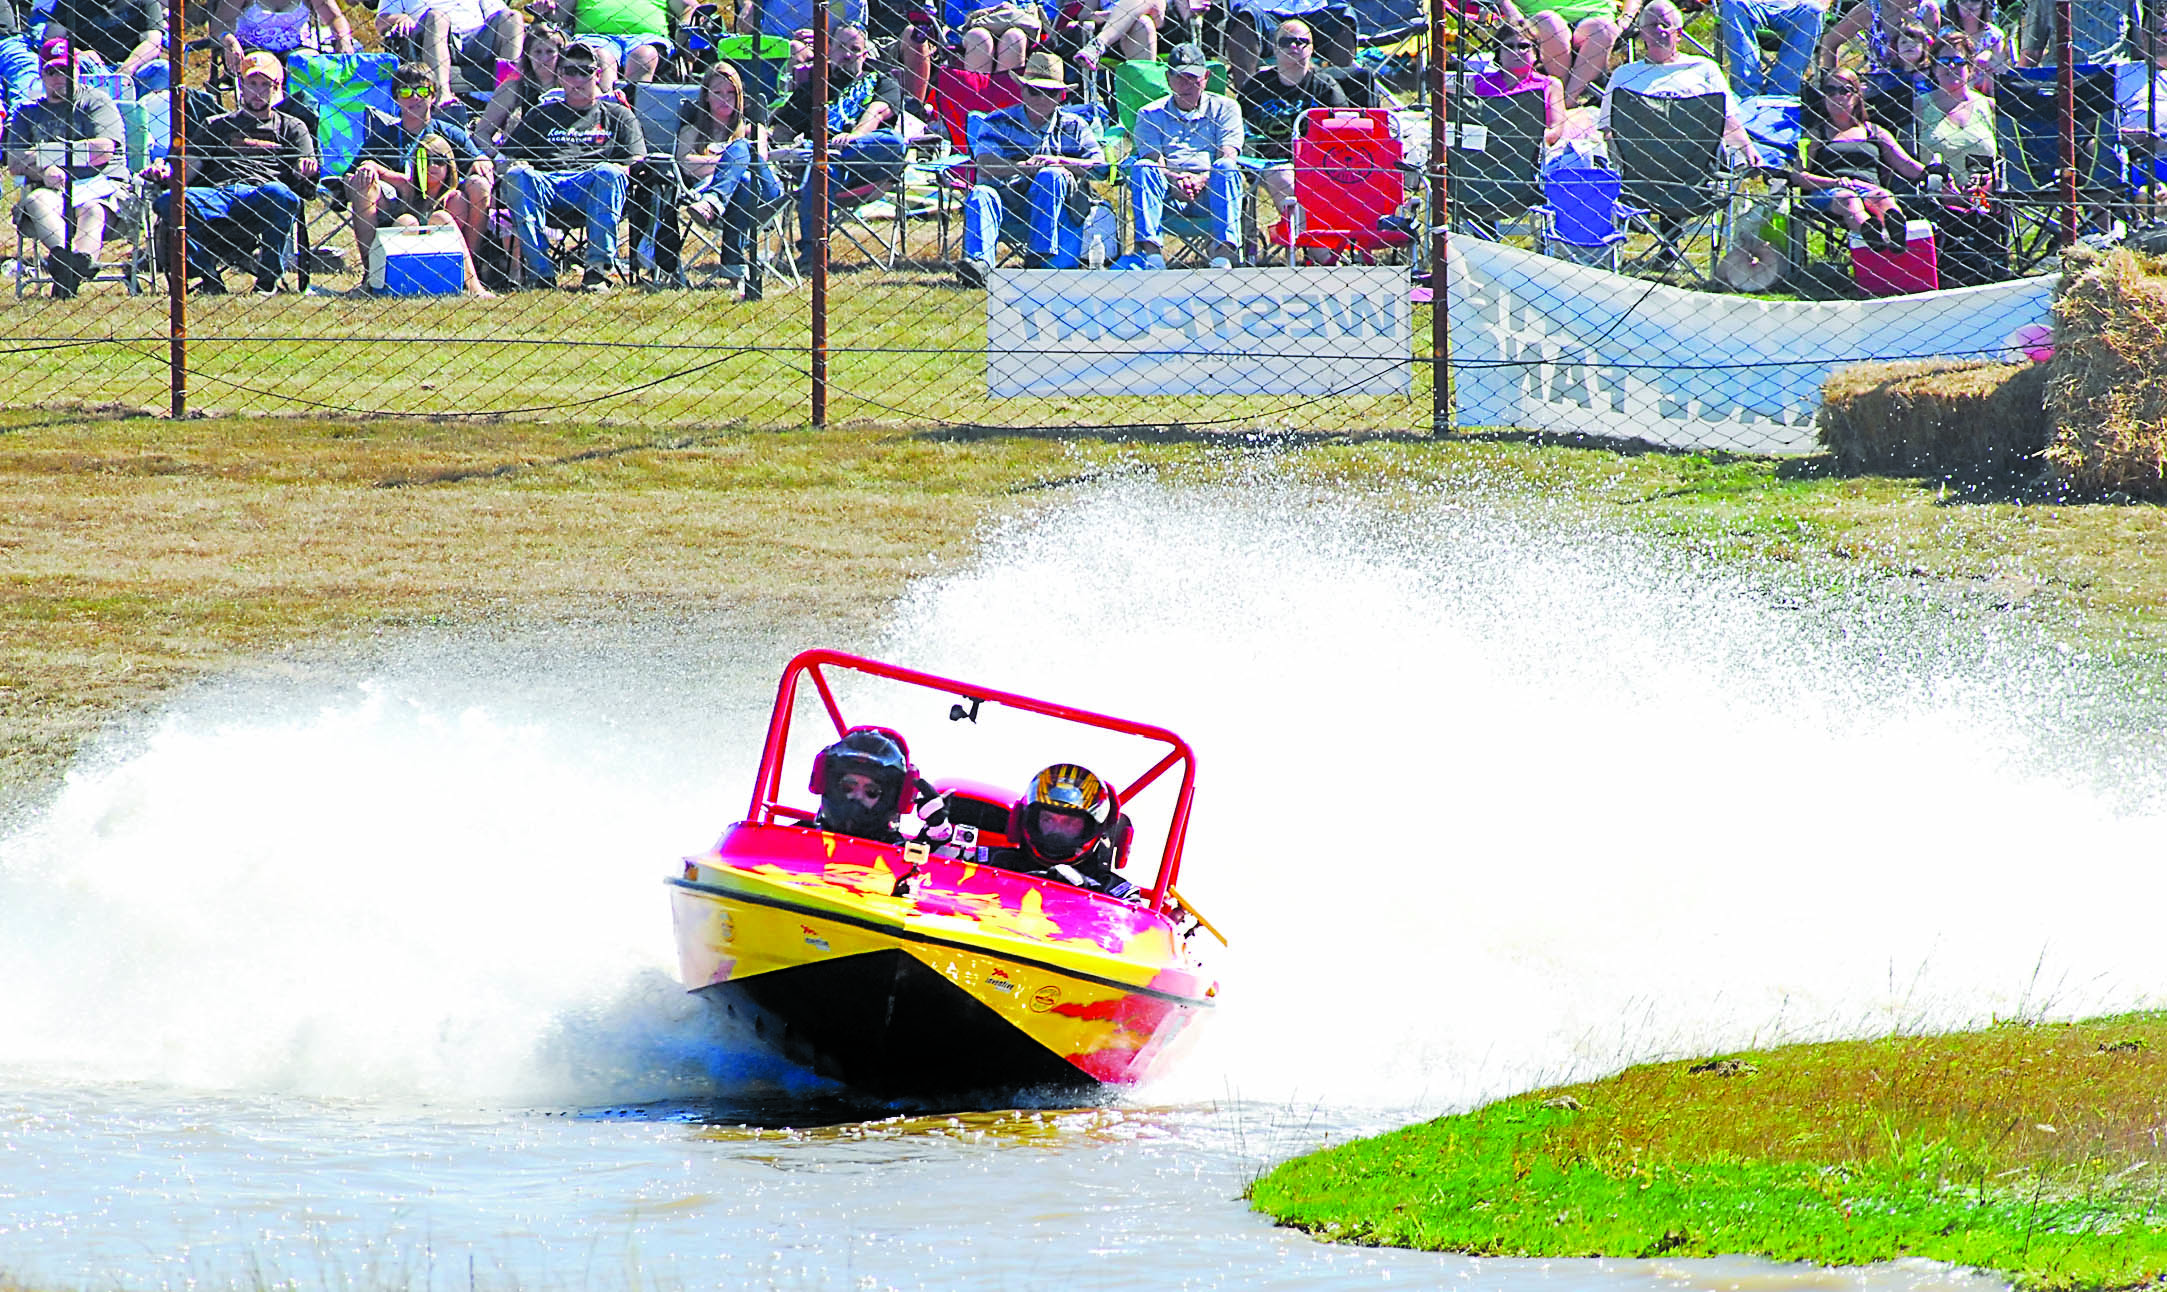 Sprint boat finale set for Saturday; boat preview today in downtown